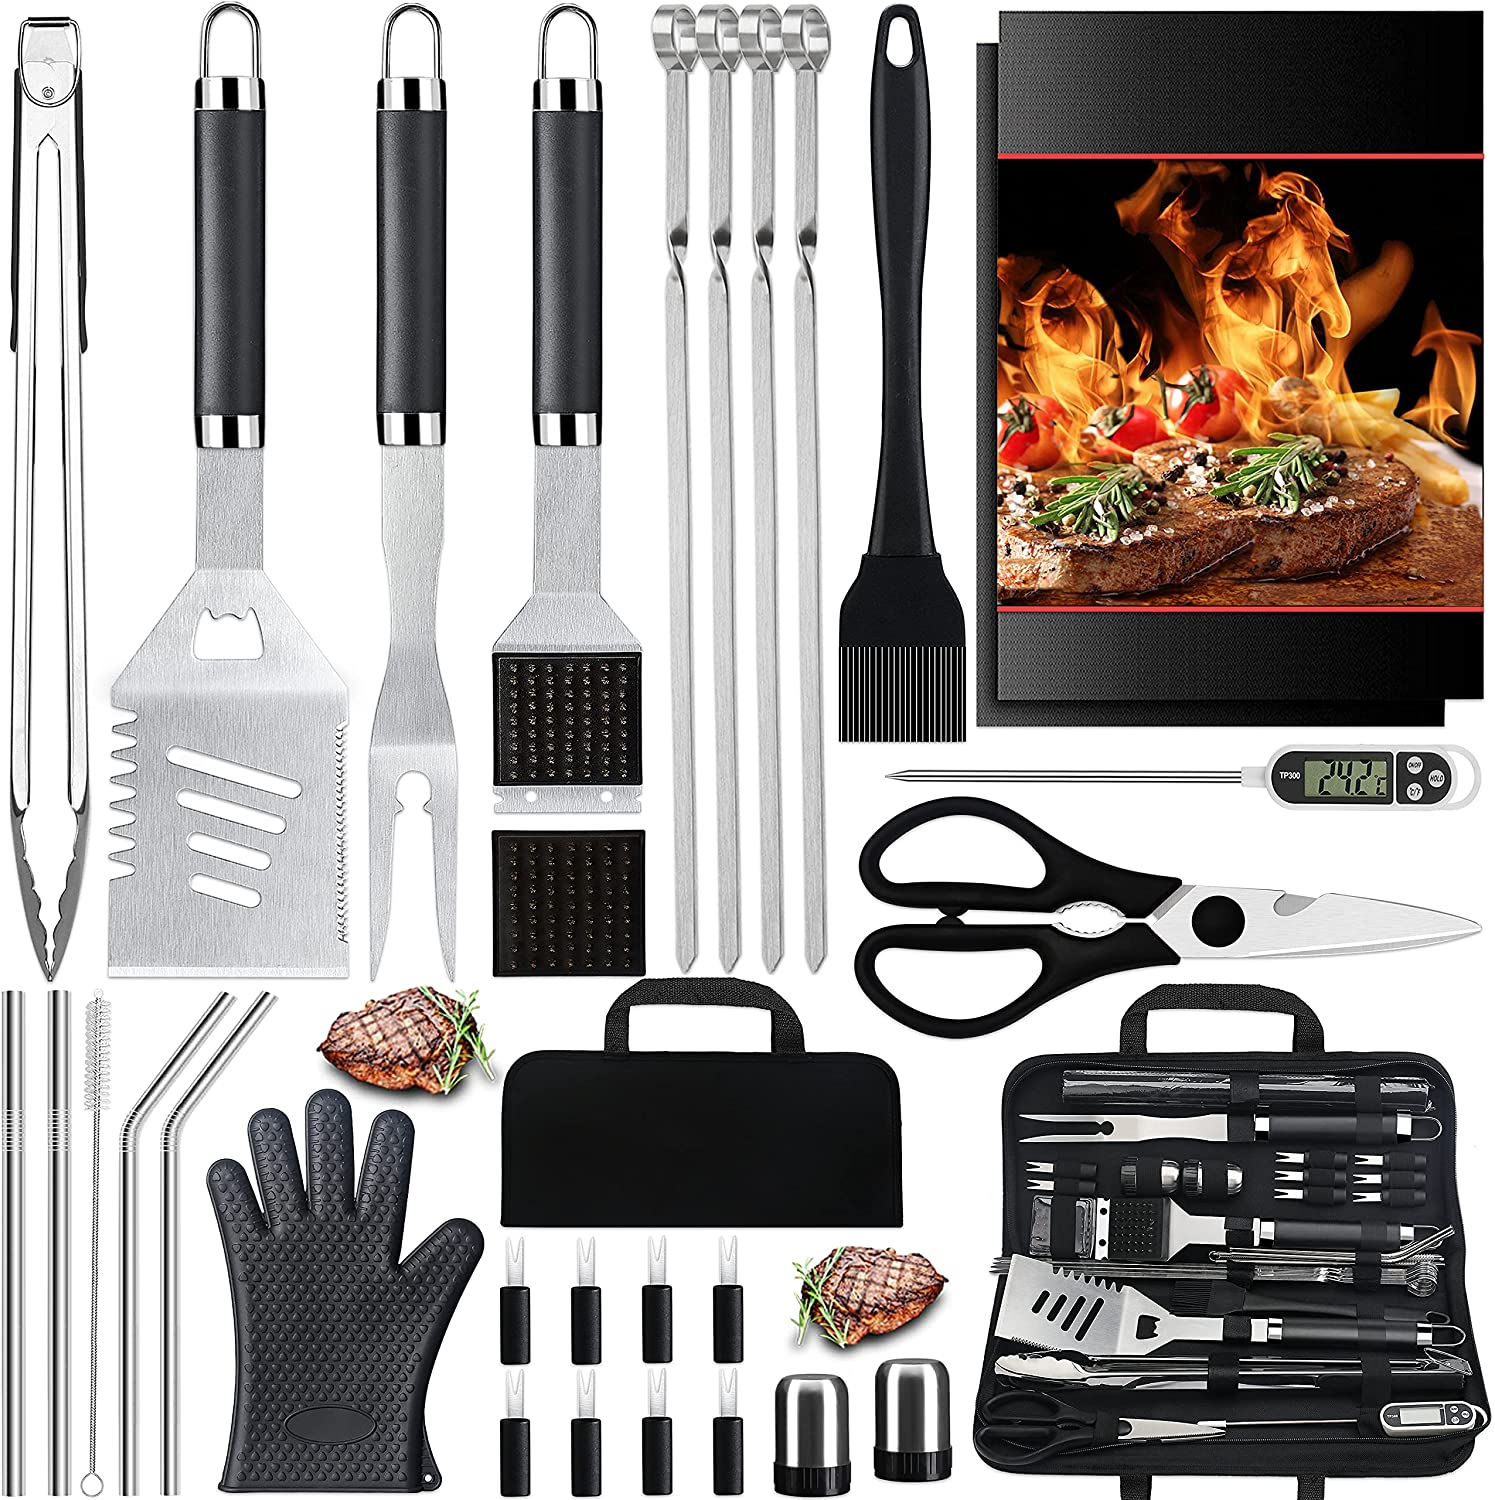 31PC Heavy Duty BBQ Grilling Accessories Grill Tools Set